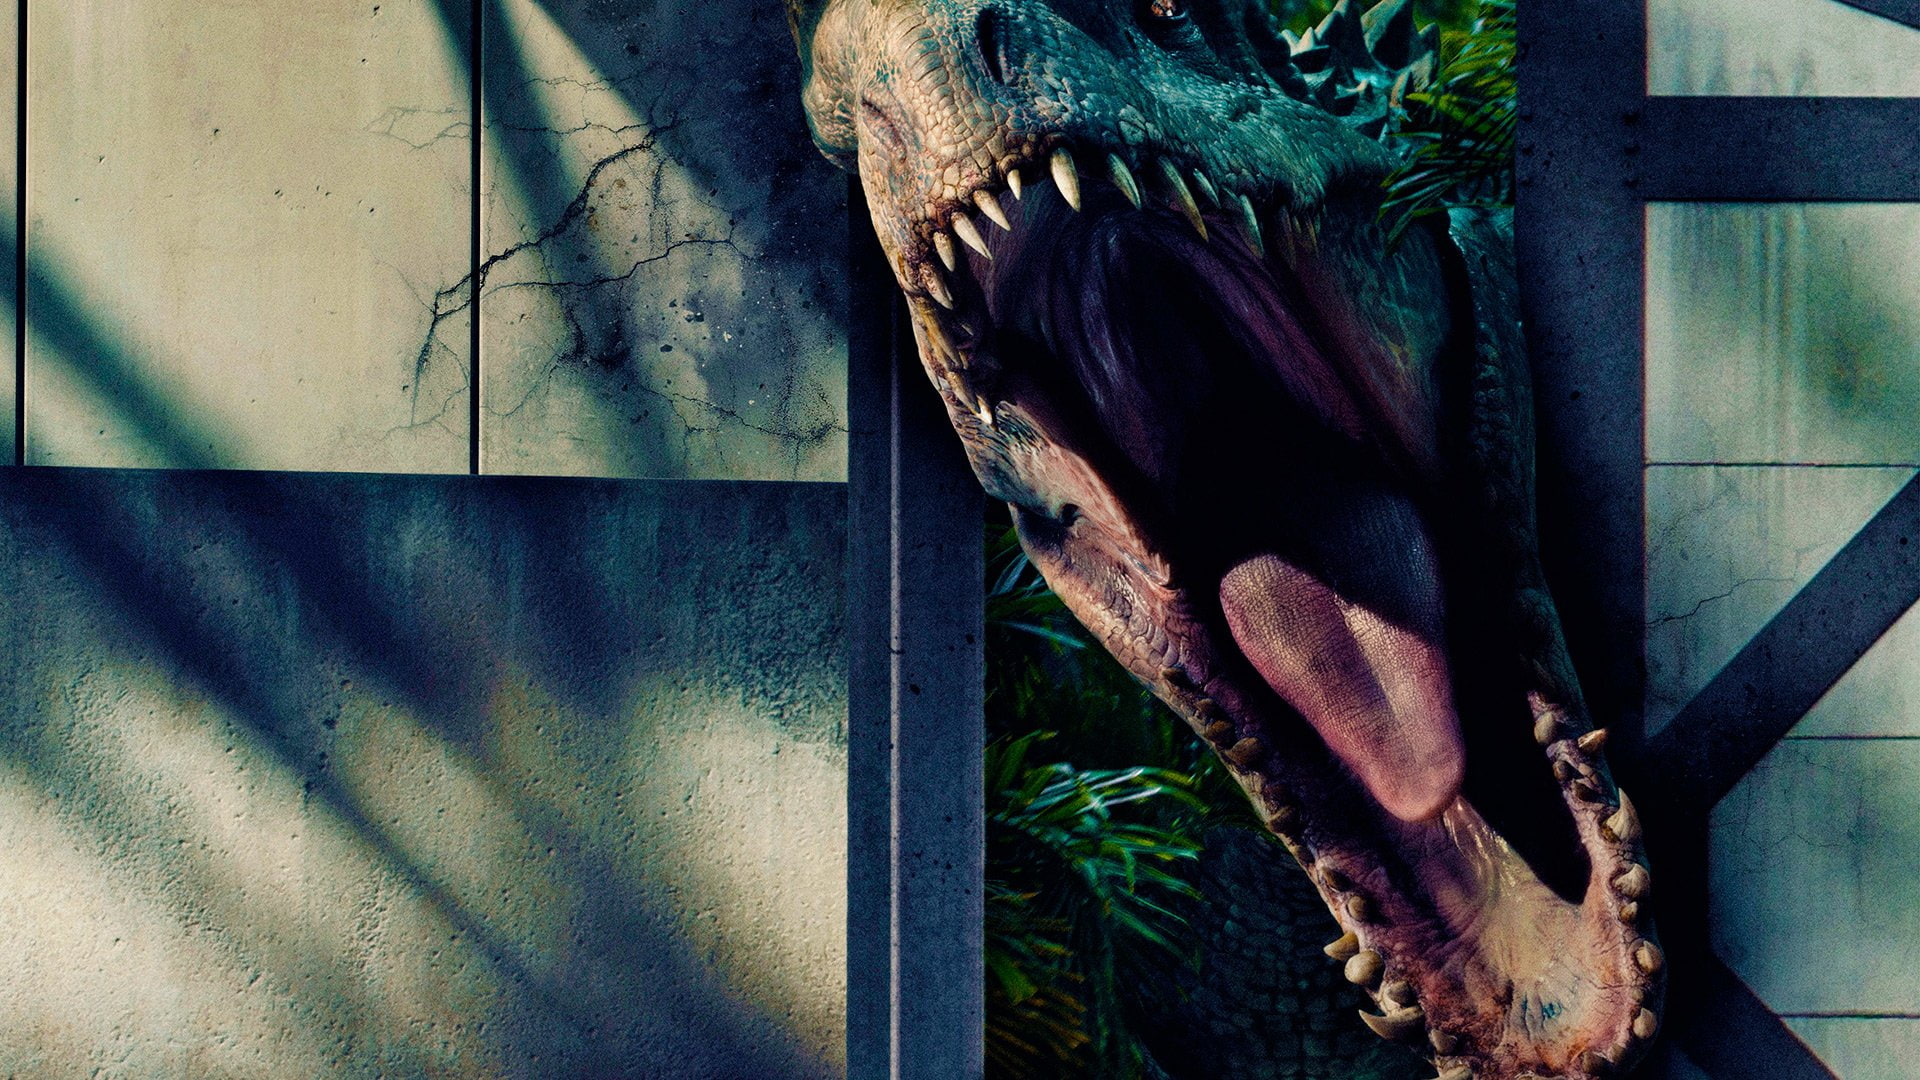 Jurassic Park, Jurassic World, plant, nature, day, growth, no people